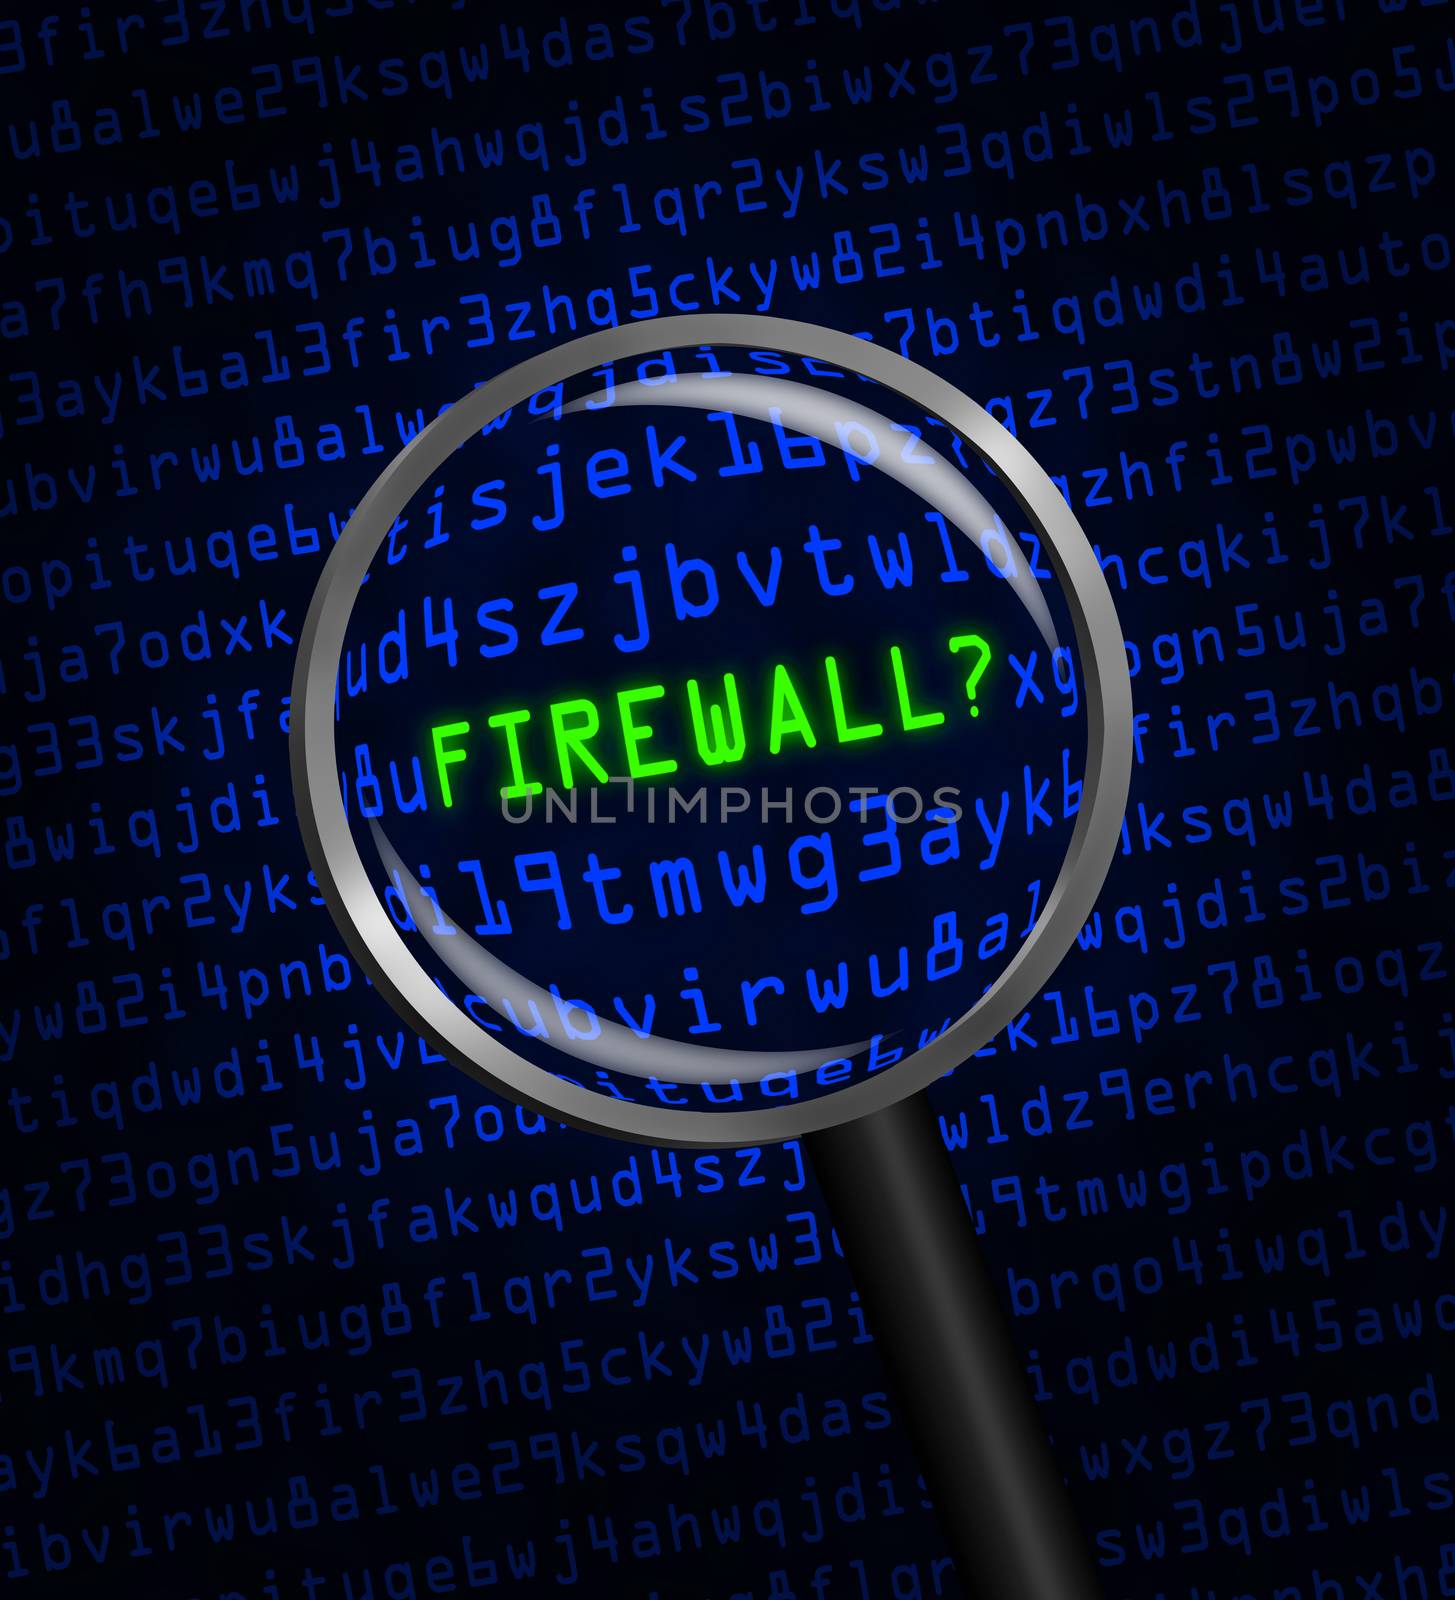 "FIREWALL?" revealed in computer code through a magnifying glass by Balefire9